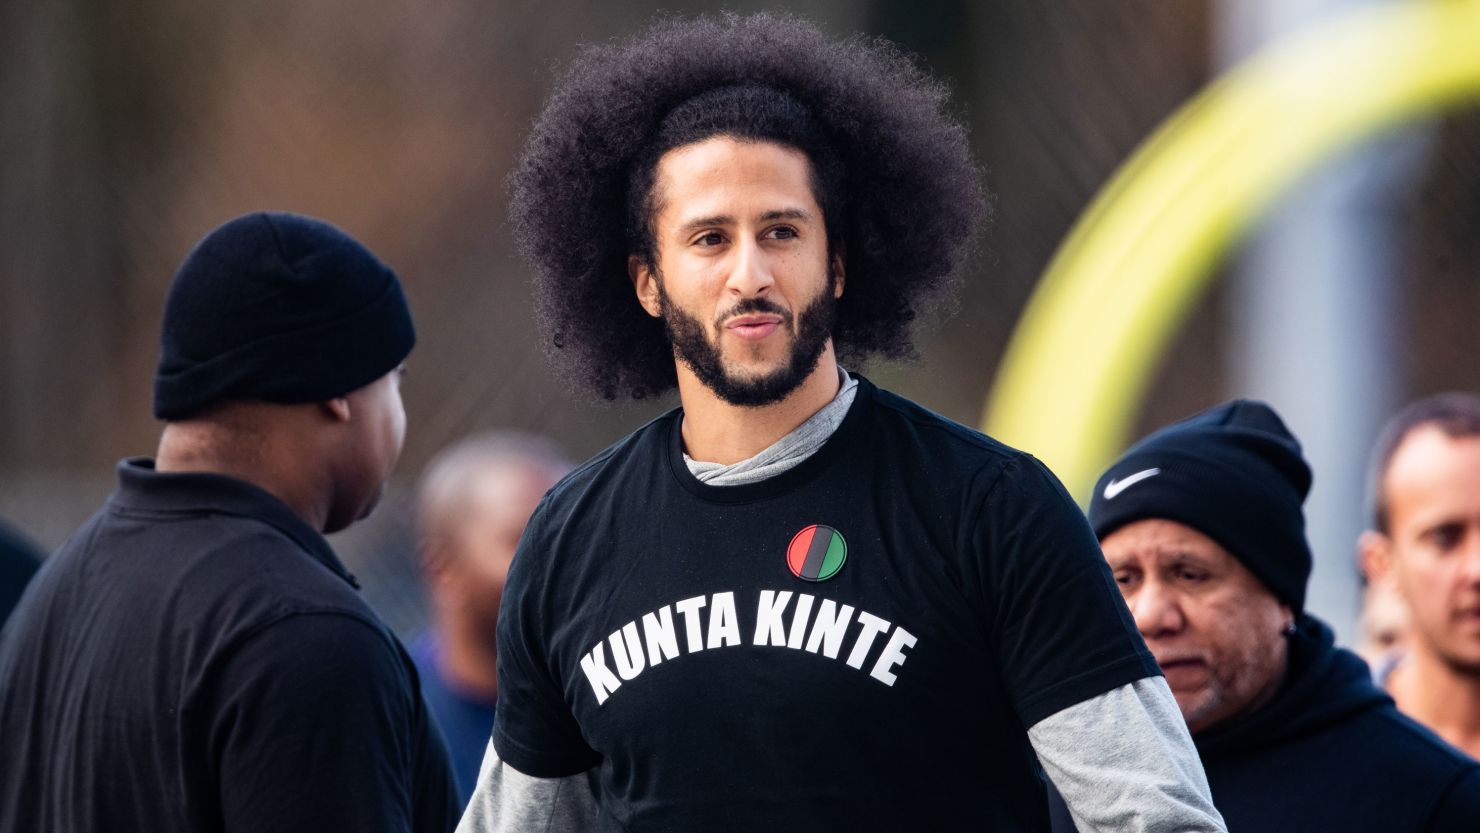 Colin Kaepernick during his NFL workout held in Riverdale, Georgia, on November 16, 2019. 